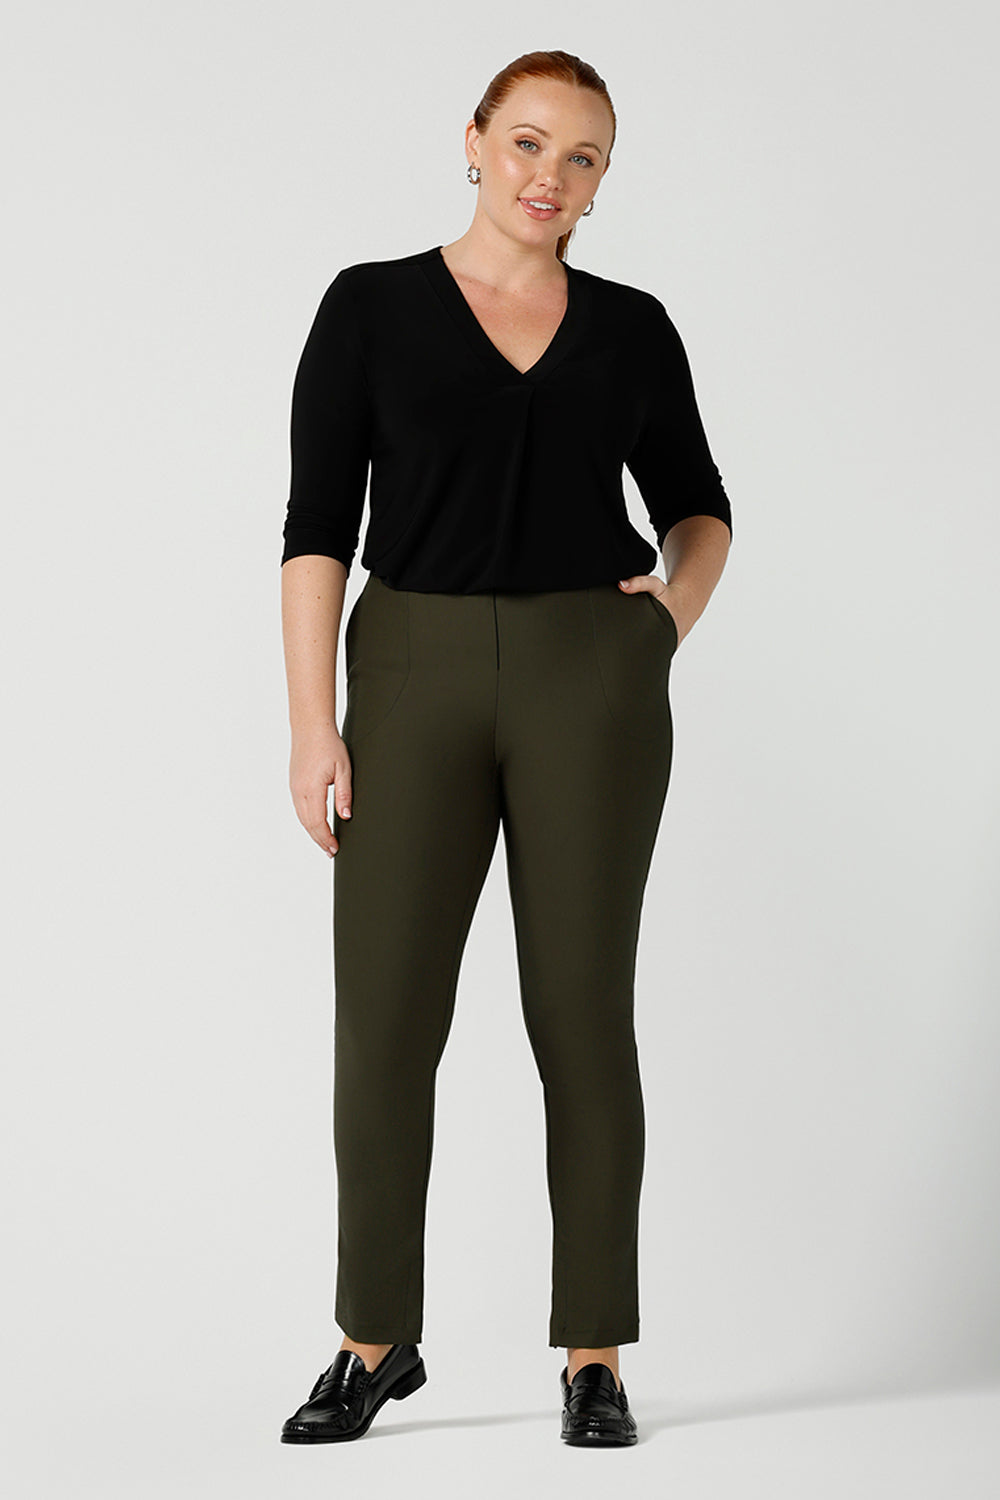 Smart-casual, professional pants for women, these olive green slim leg pants are worn with a V-neck black top with 3/4 sleeves. Made in Australia by online ladies clothing brand, Leina & Fleur shop these comfortable trousers in petite to plus sizes.